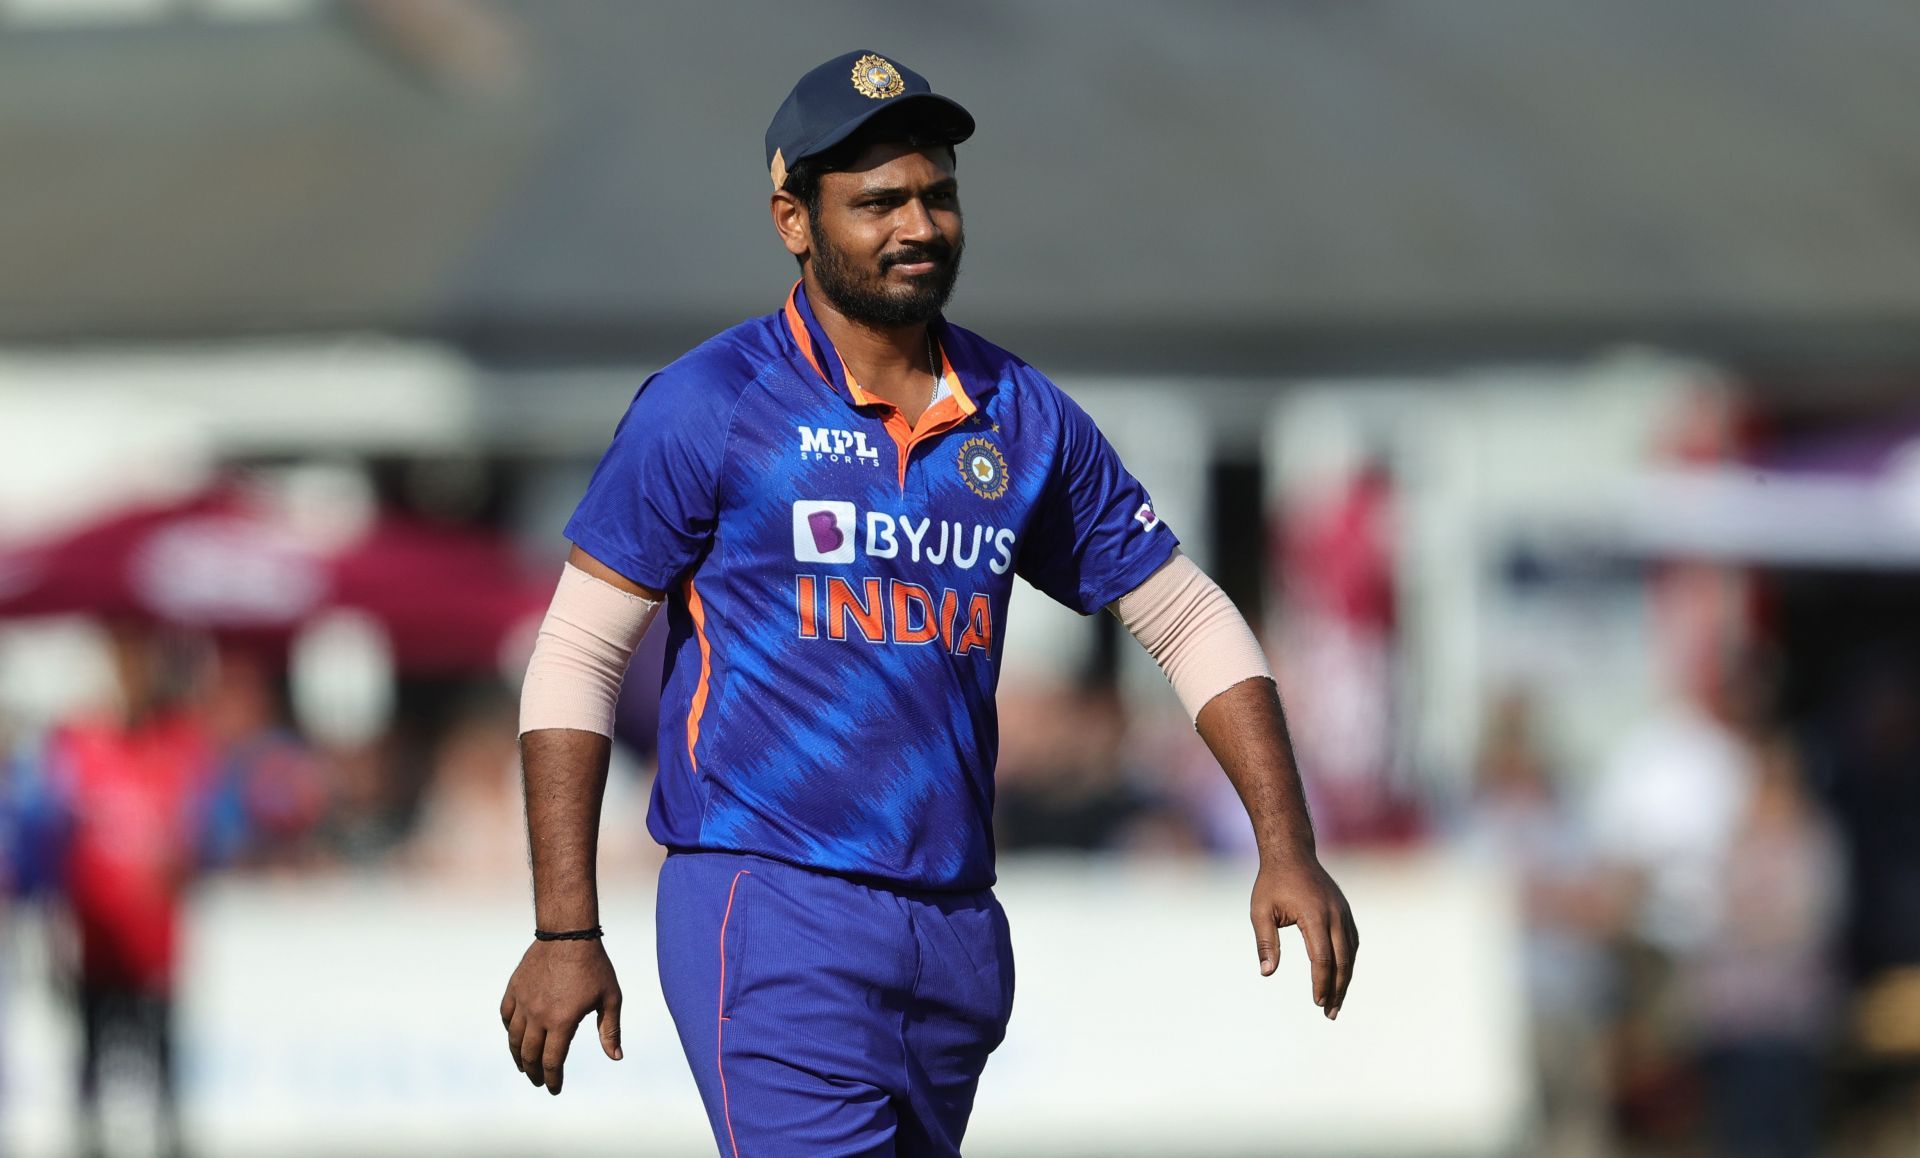 Samson will look to cement his place in the Indian T20 side. (Pic: Getty)